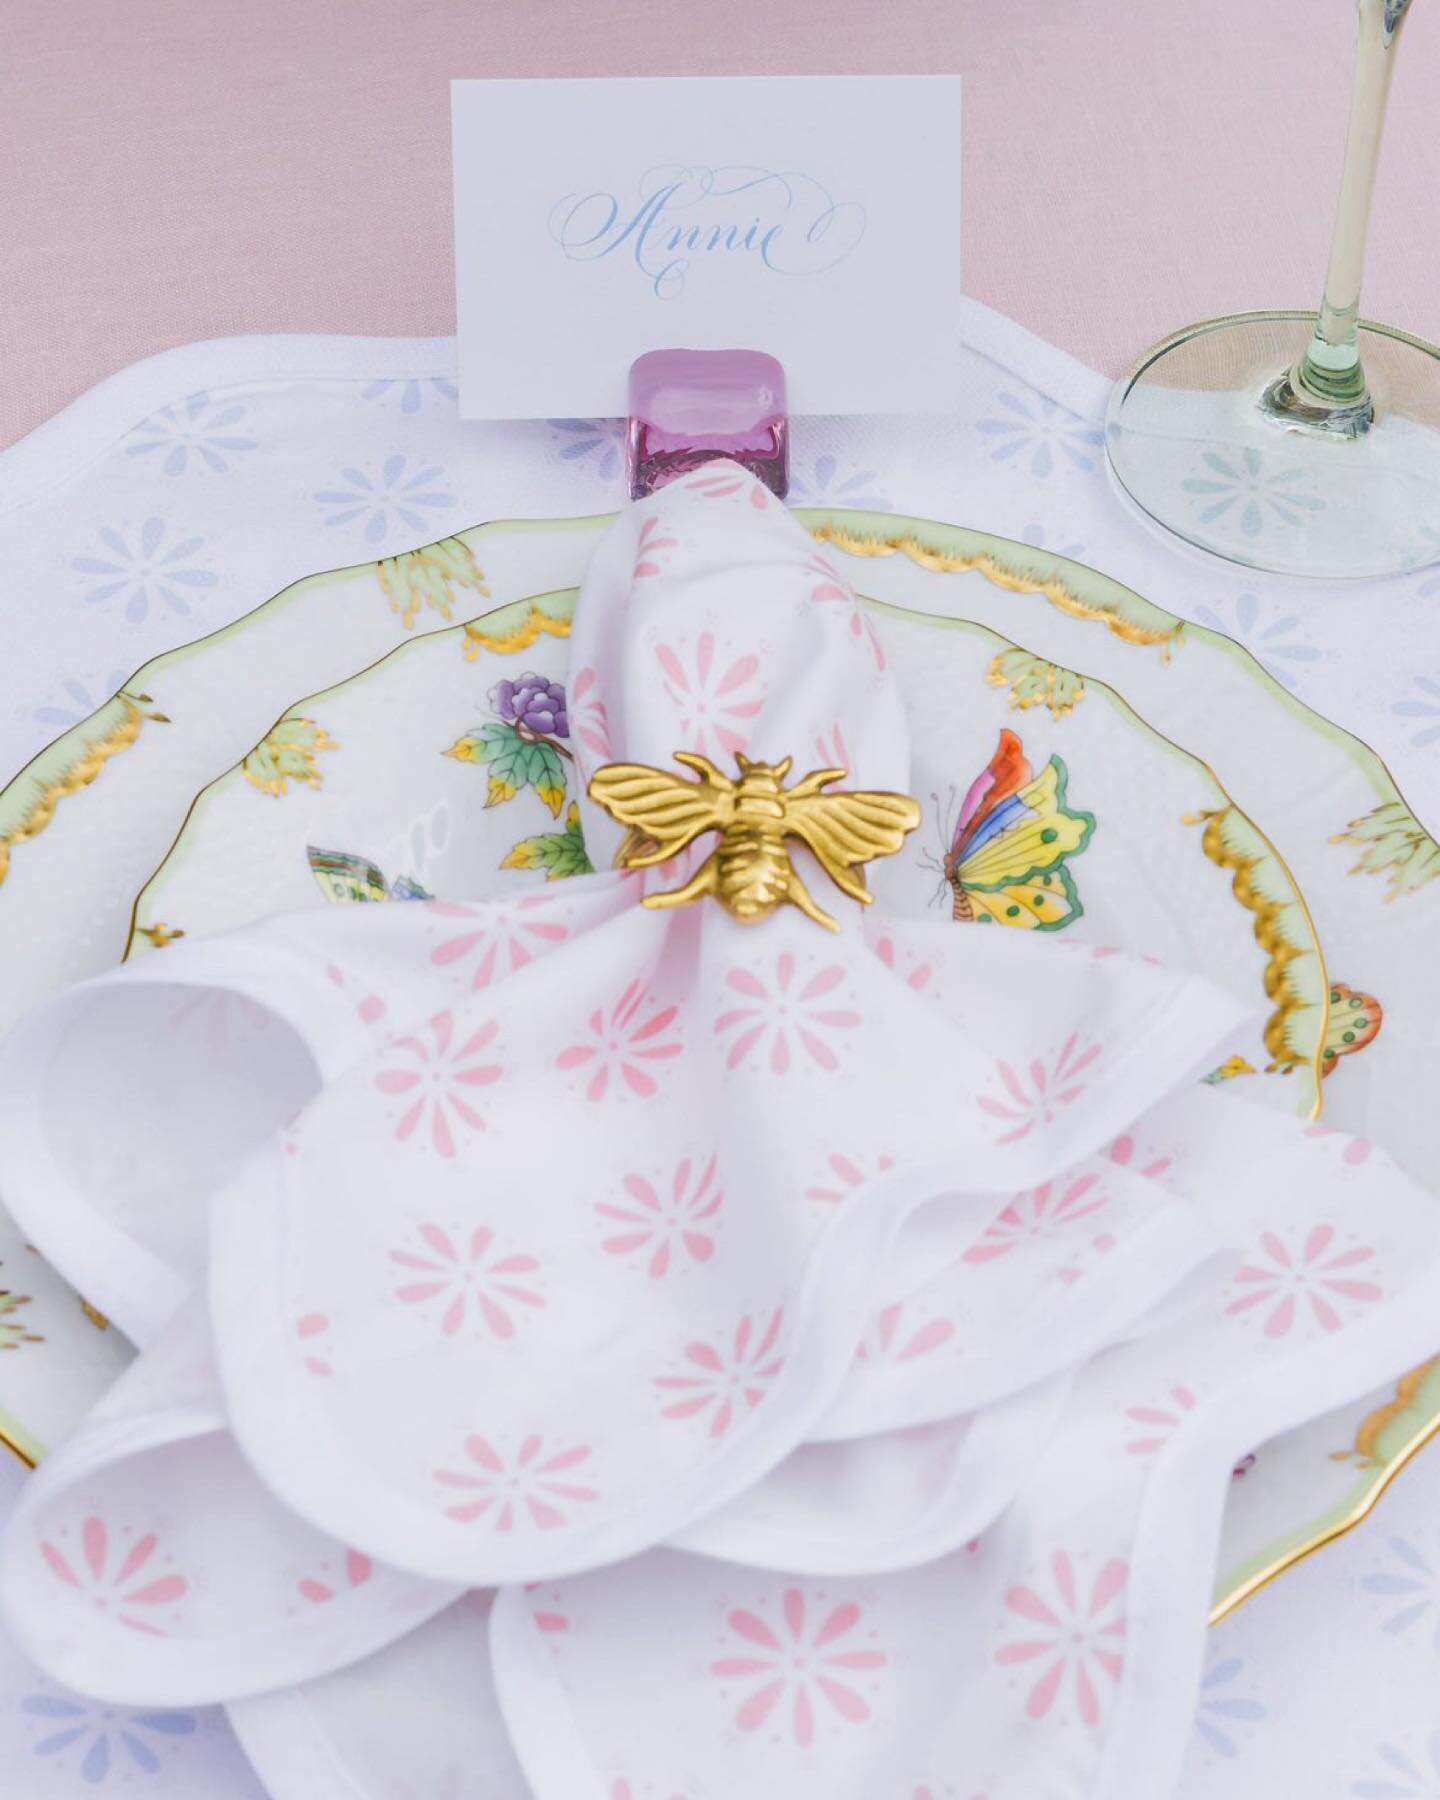 Thinking spring! 🌷🌷🌷 Isn&rsquo;t this just the prettiest table from my sweet friends @fenwickfields!?

If you&rsquo;re planning your own spring tablescapes, I just opened up Easter place card orders on my website &mdash; this next month is wild so